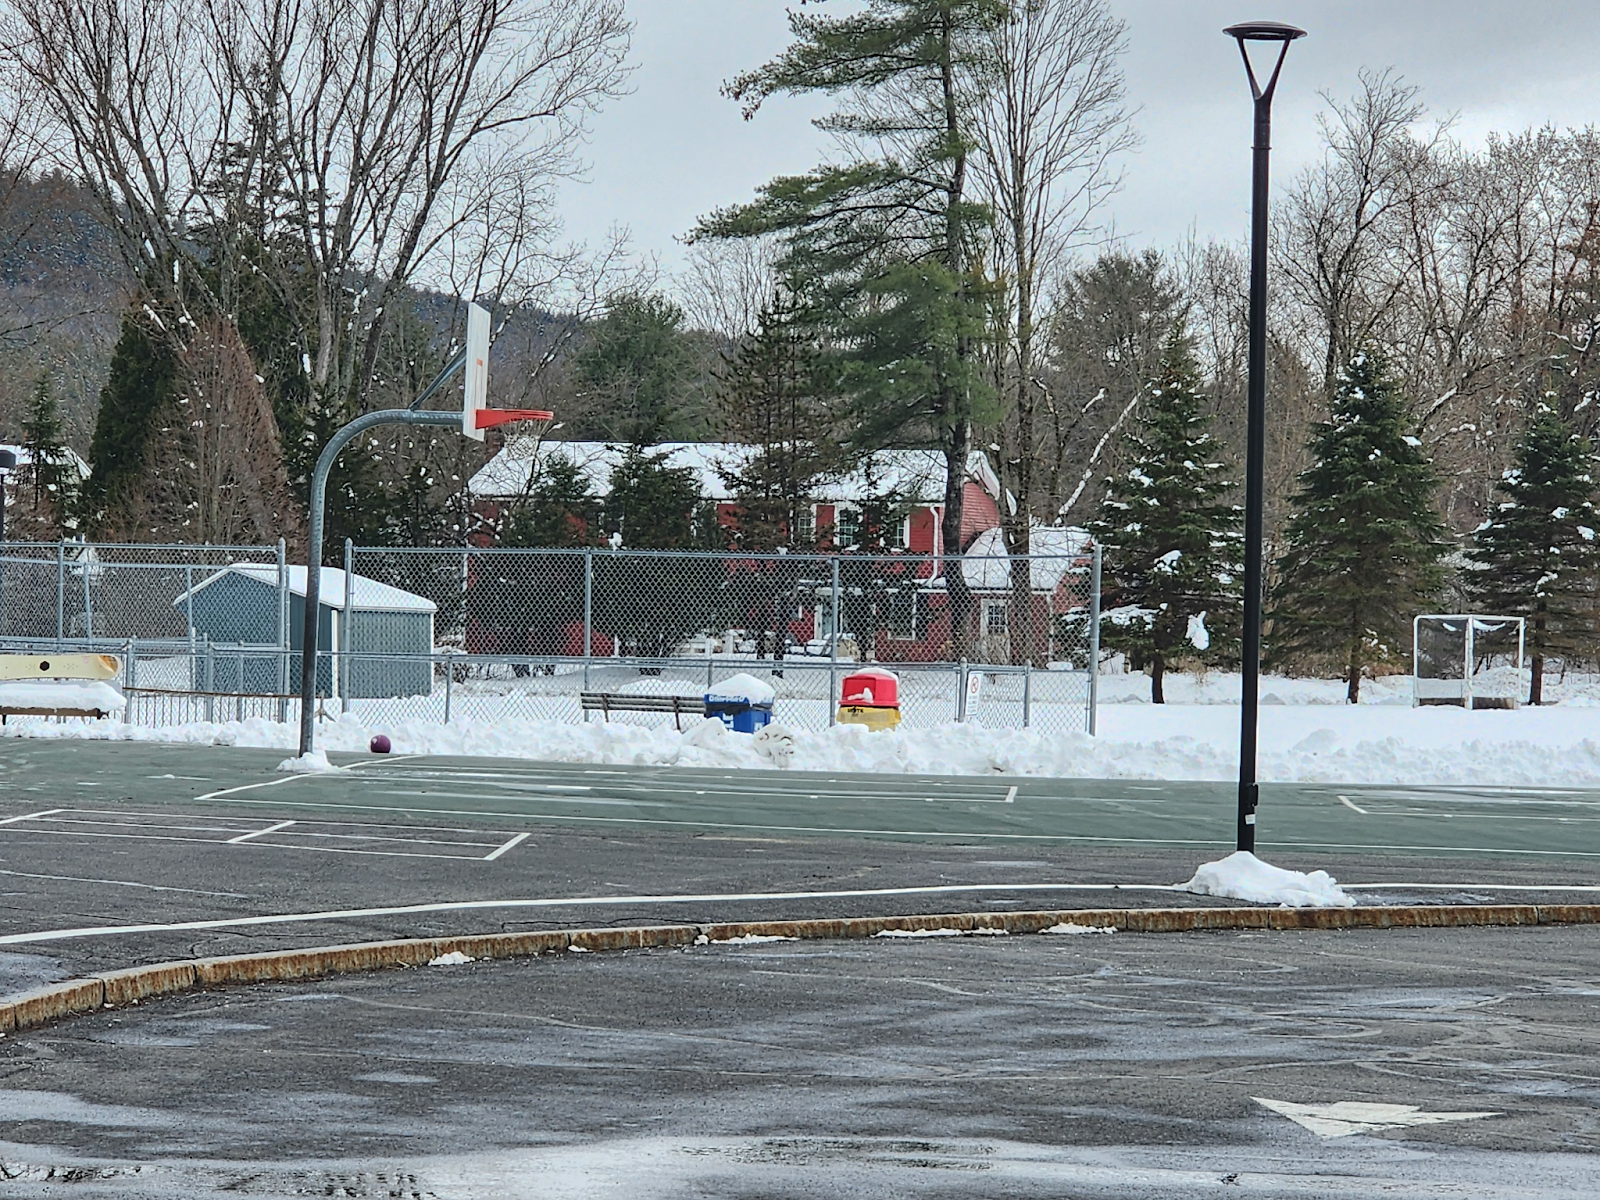 RMS grounds with snow